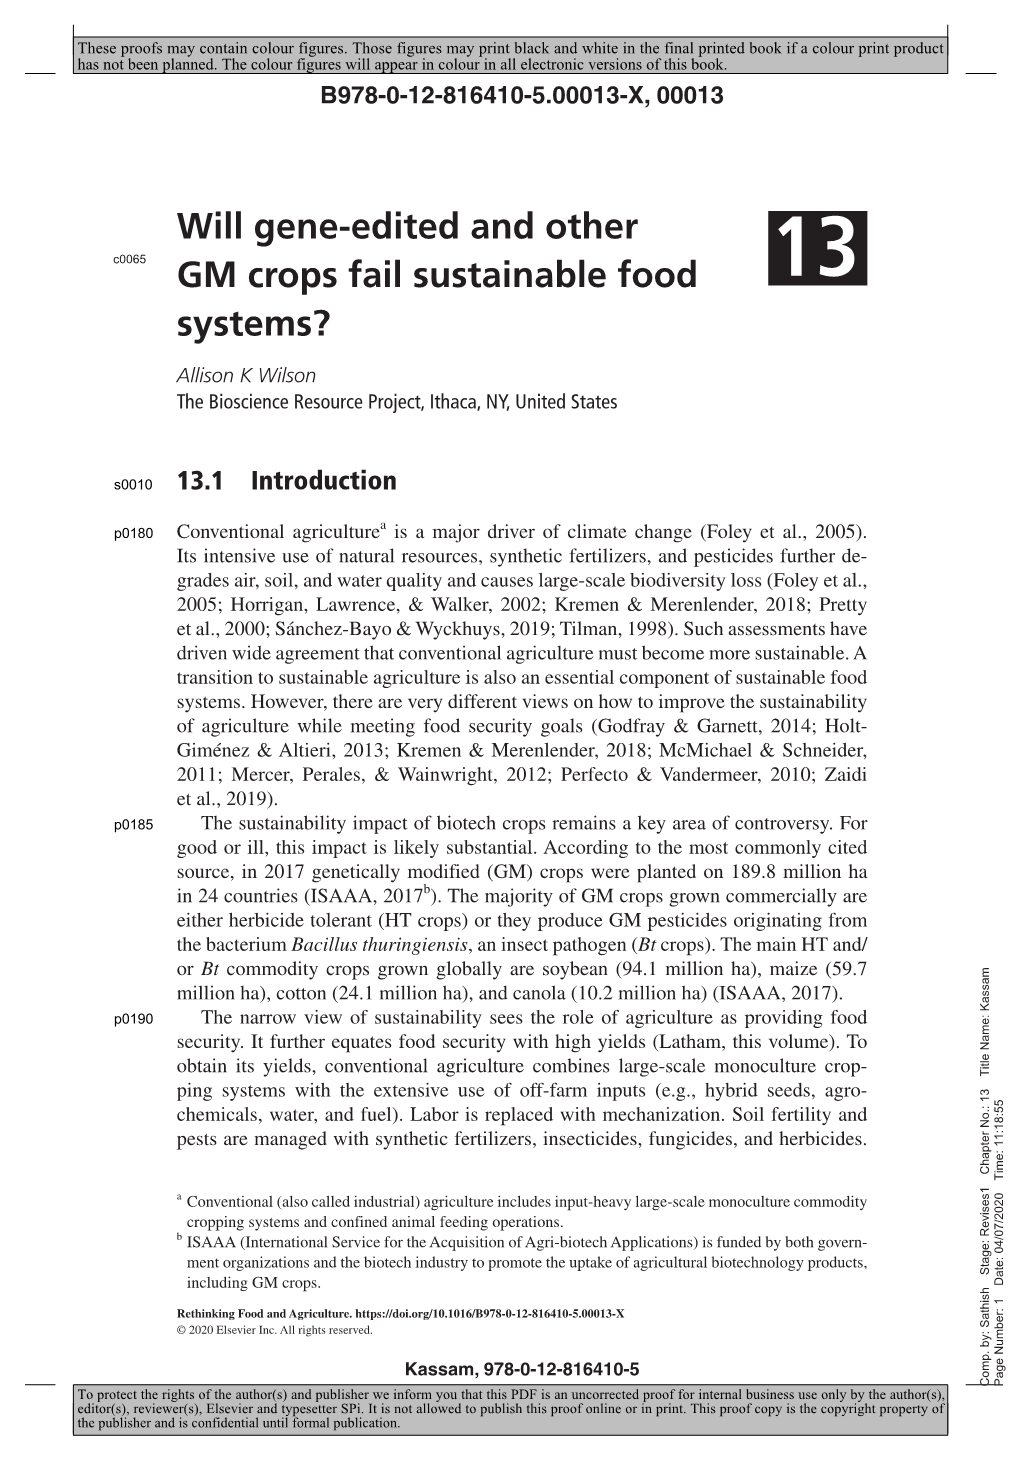 Will Gene-Edited and Other GM Crops Fail Sustainable Food Systems?